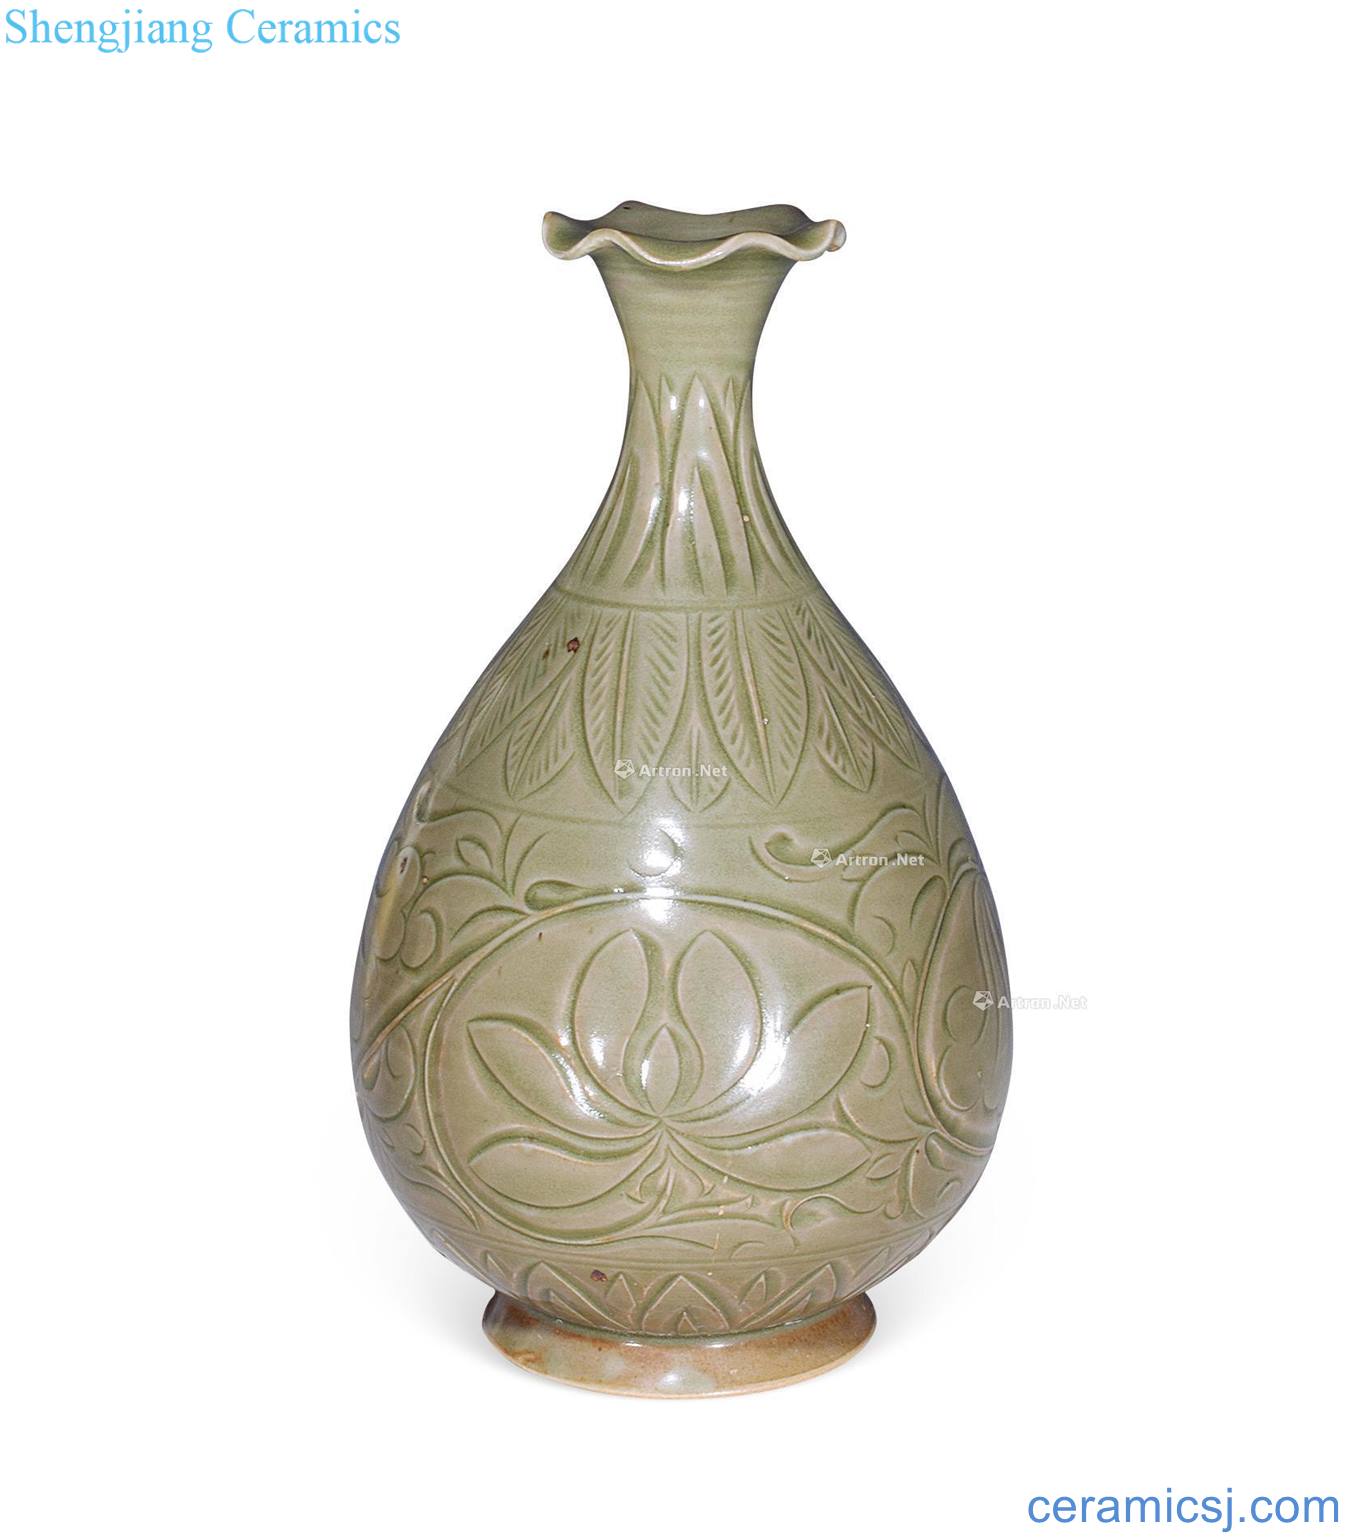 The song of the kiln carved flowers okho spring bottle mouth